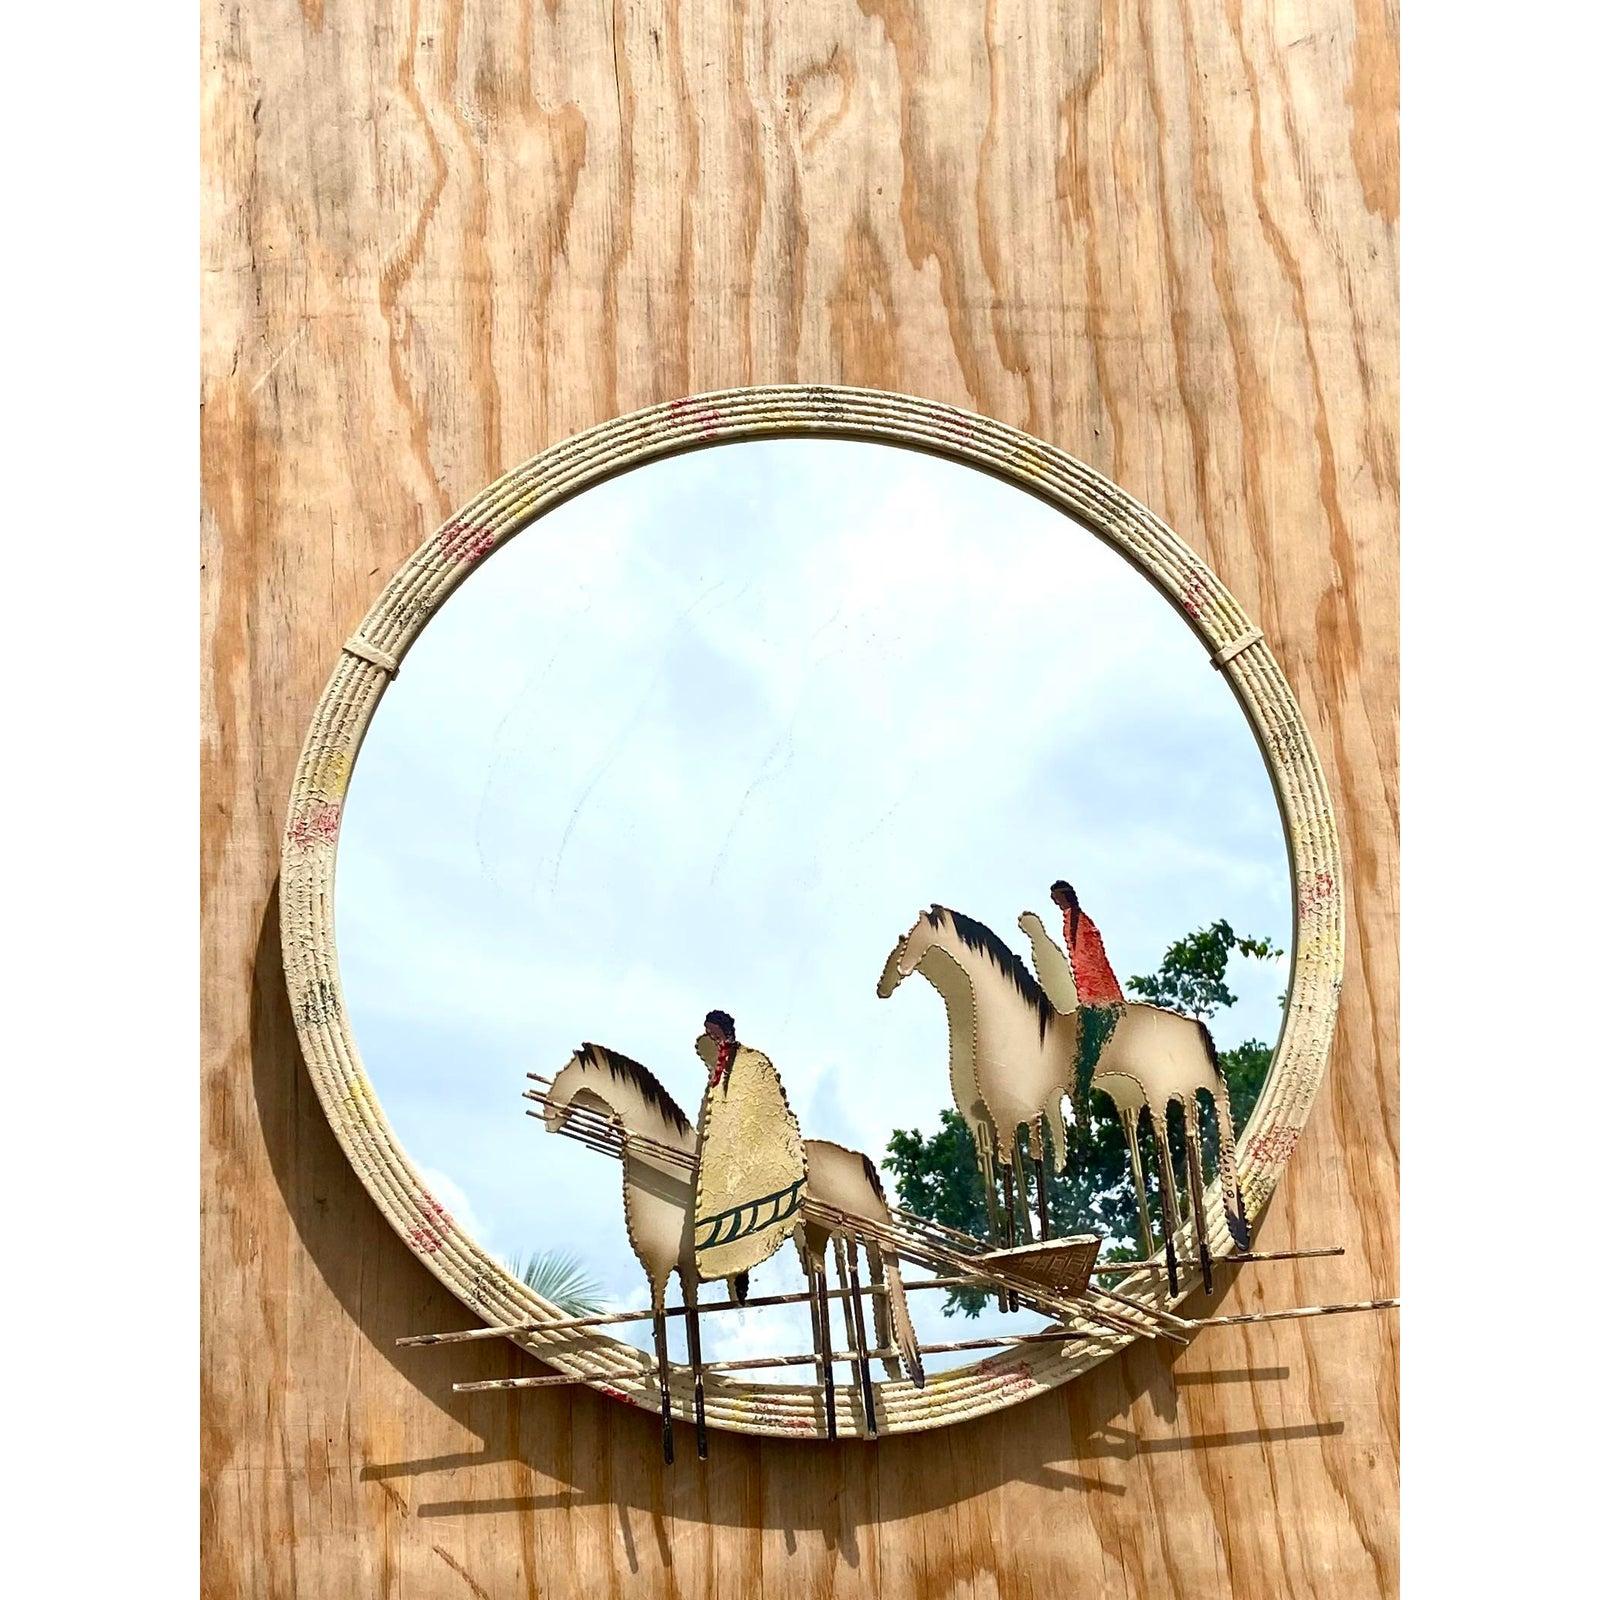 Incredible vintage Curtis Jere mirror. Signed and dated 1975. Beautiful torch cut composition of Native American horseback riders. Acquired from a Palm Beach estate.